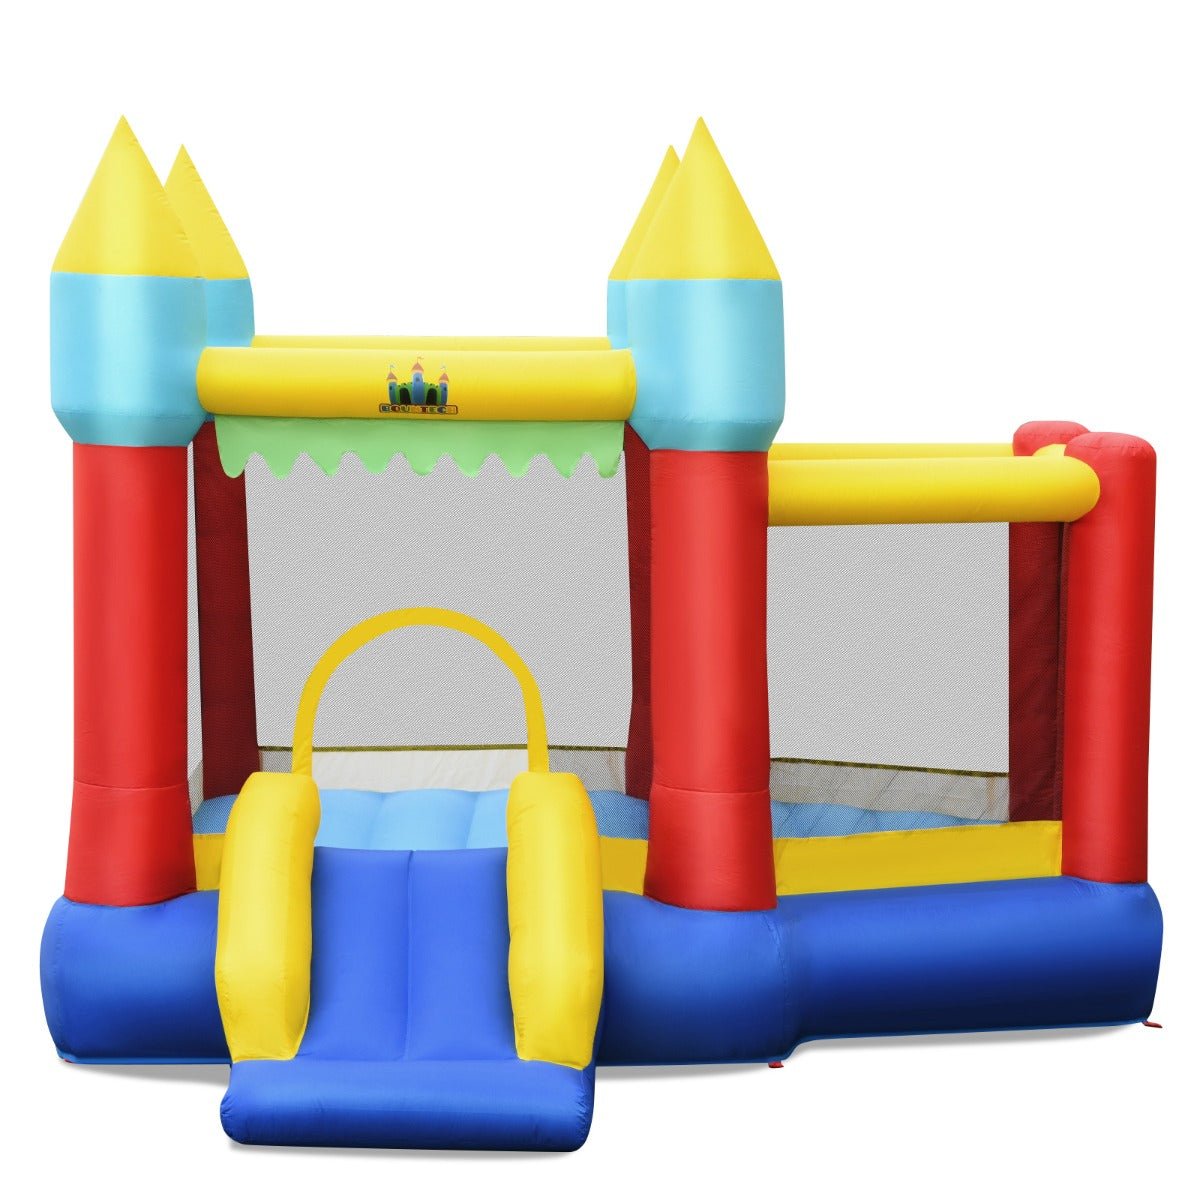 Inflatable Bouncer for Kids - Basketball Challenge and Ocean Ball Play